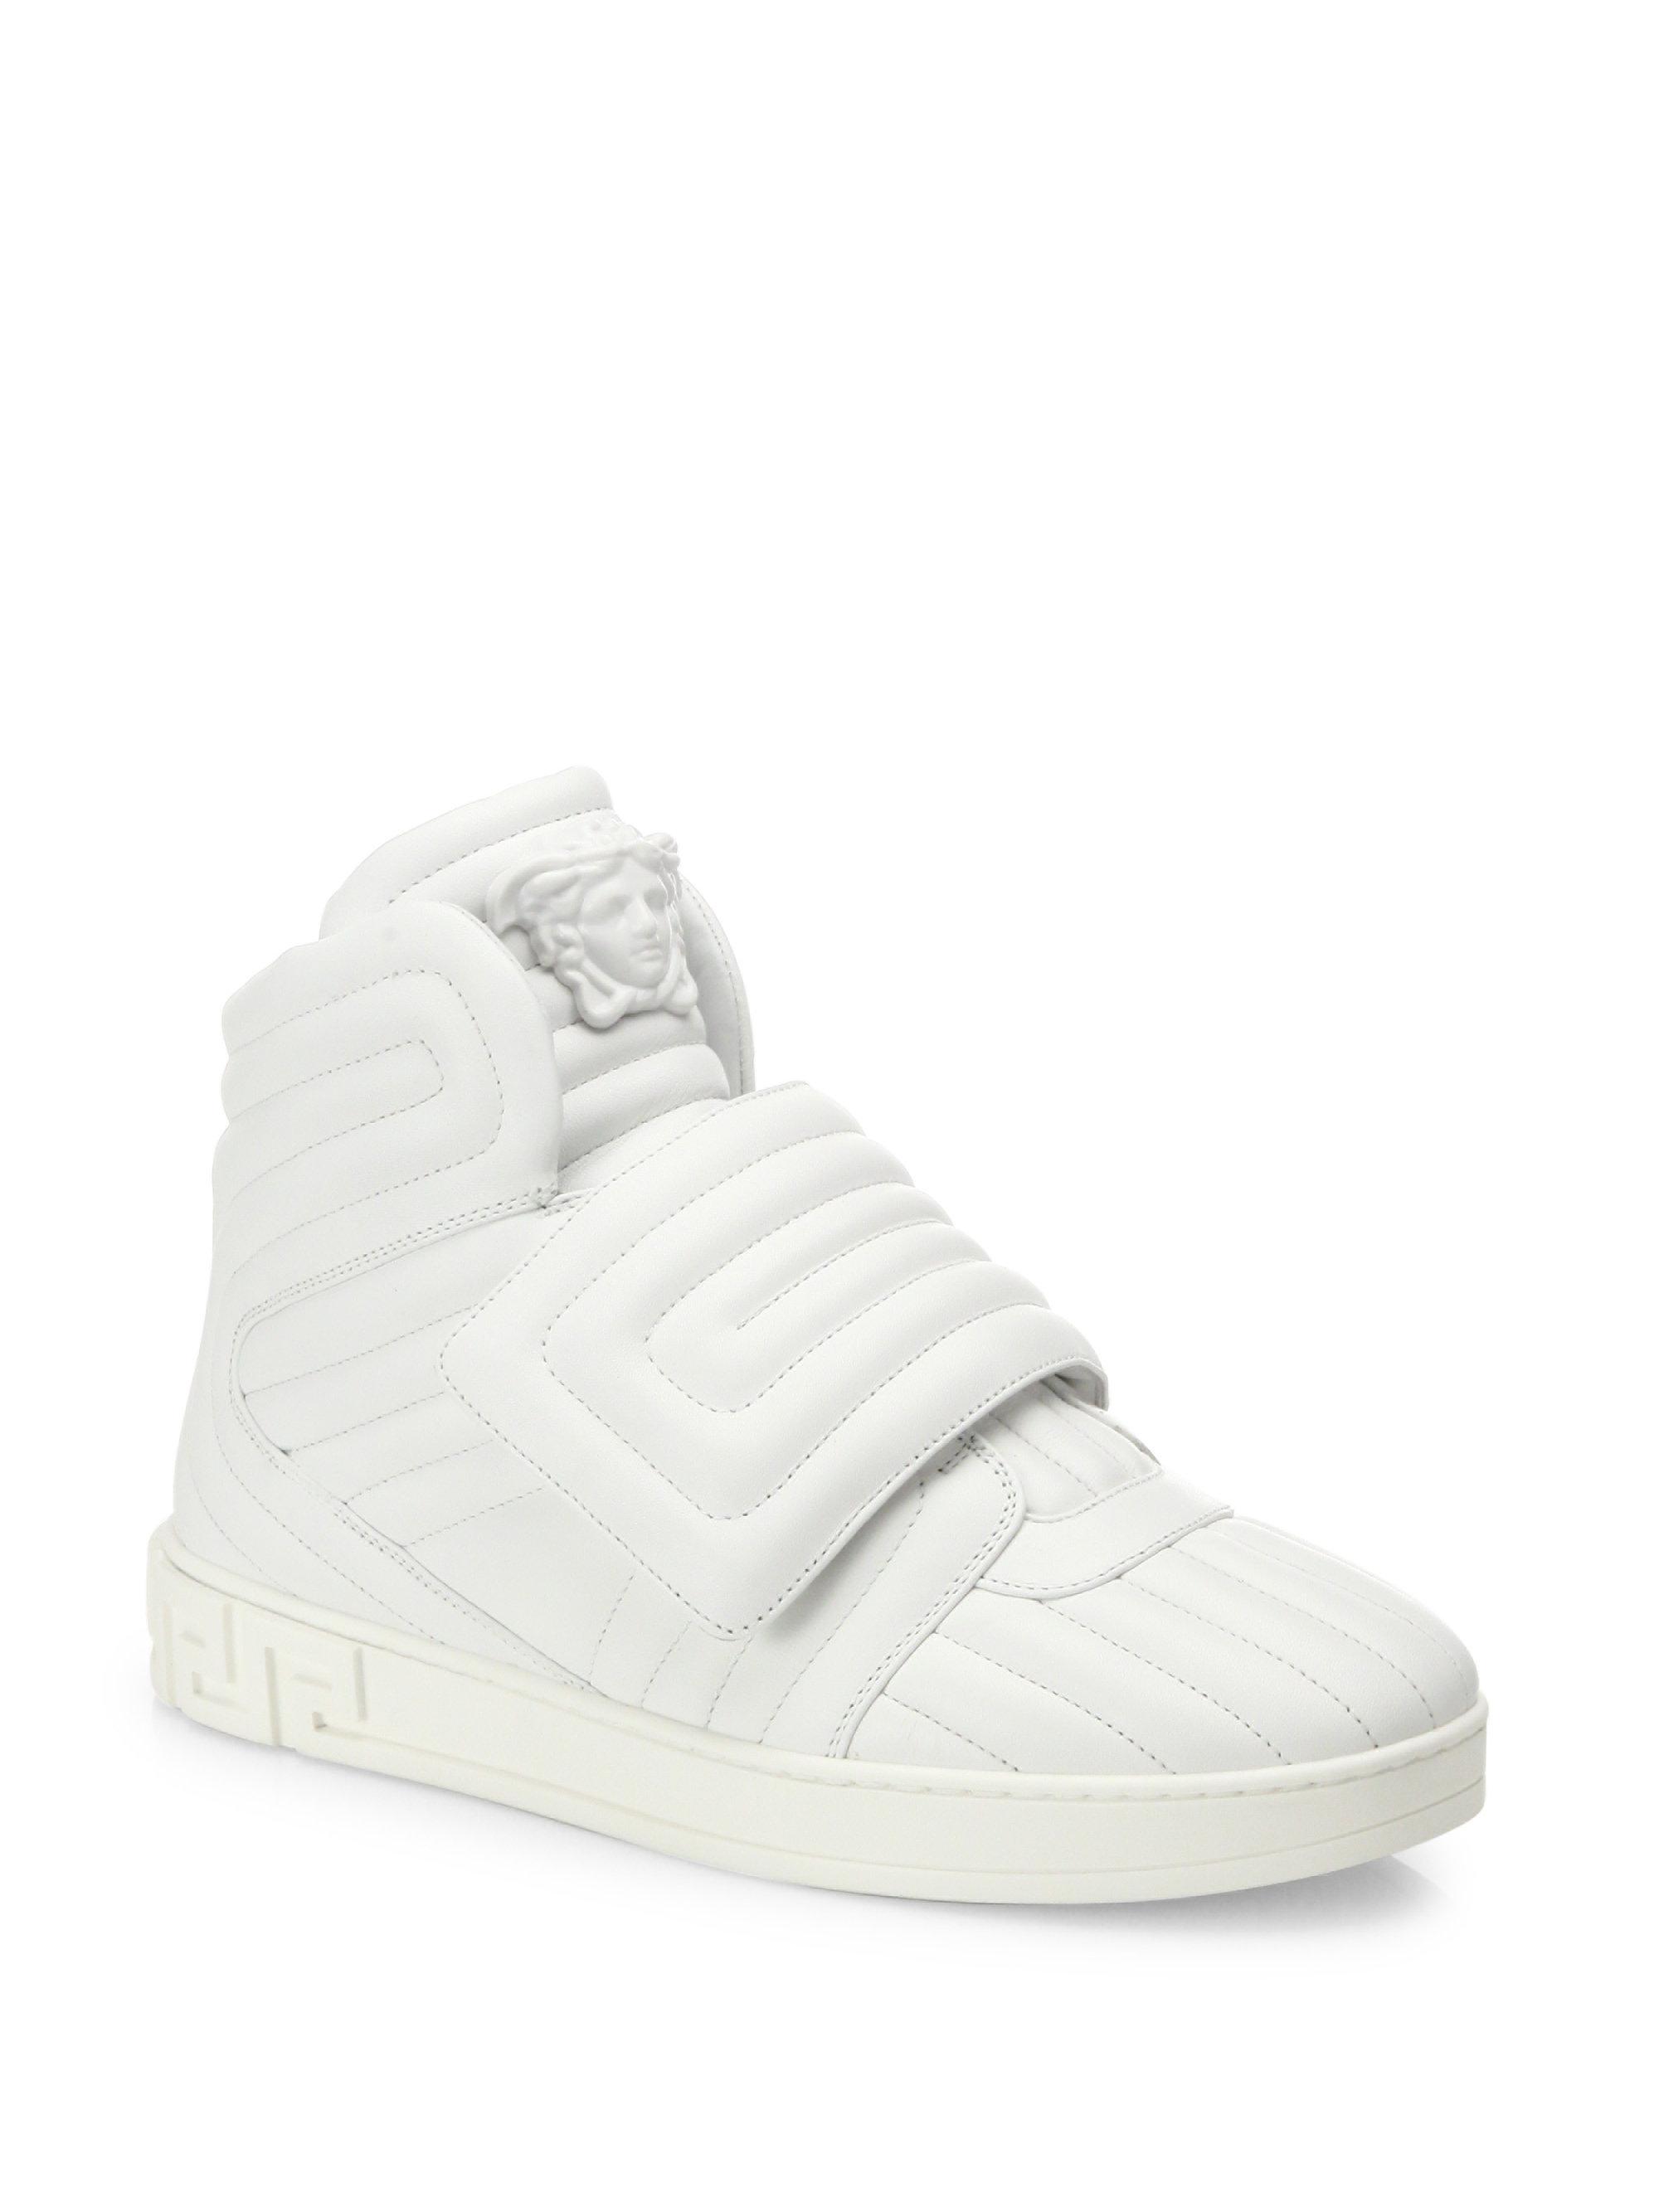 Versace Eros Leather Quilted Greek Key High-top Sneakers in White | Lyst